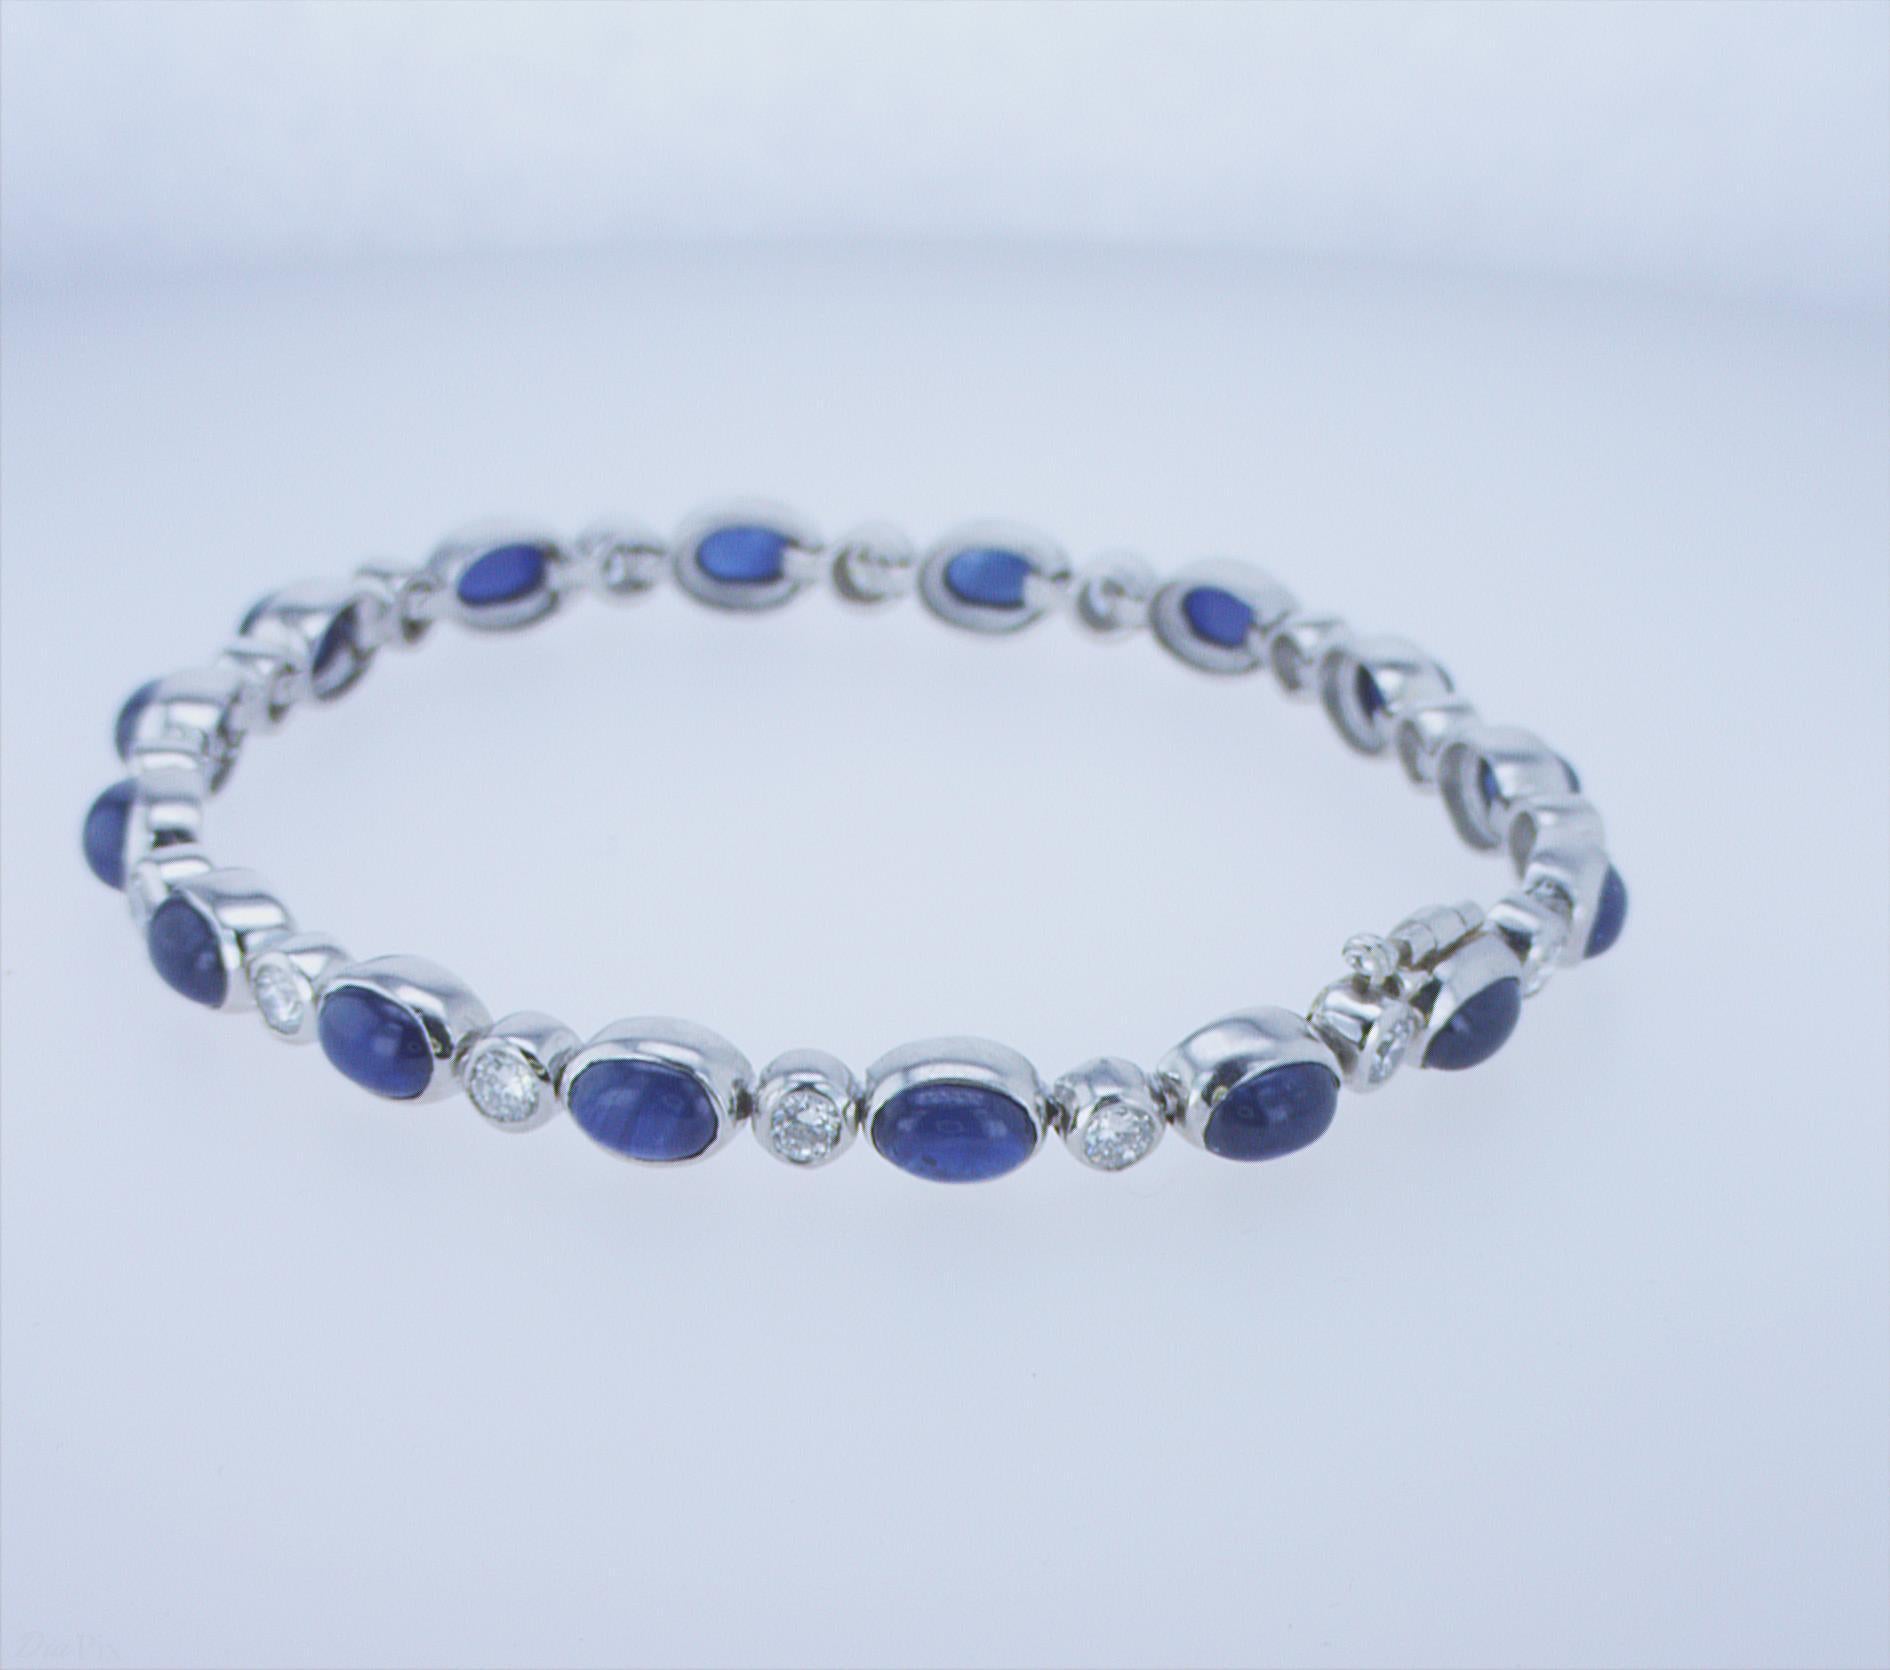 12.40ct Total Weight of Cabochon Sapphires, with 1.60ct TW of Round Brilliant Diamond Accents. Platinum. Stock Length.